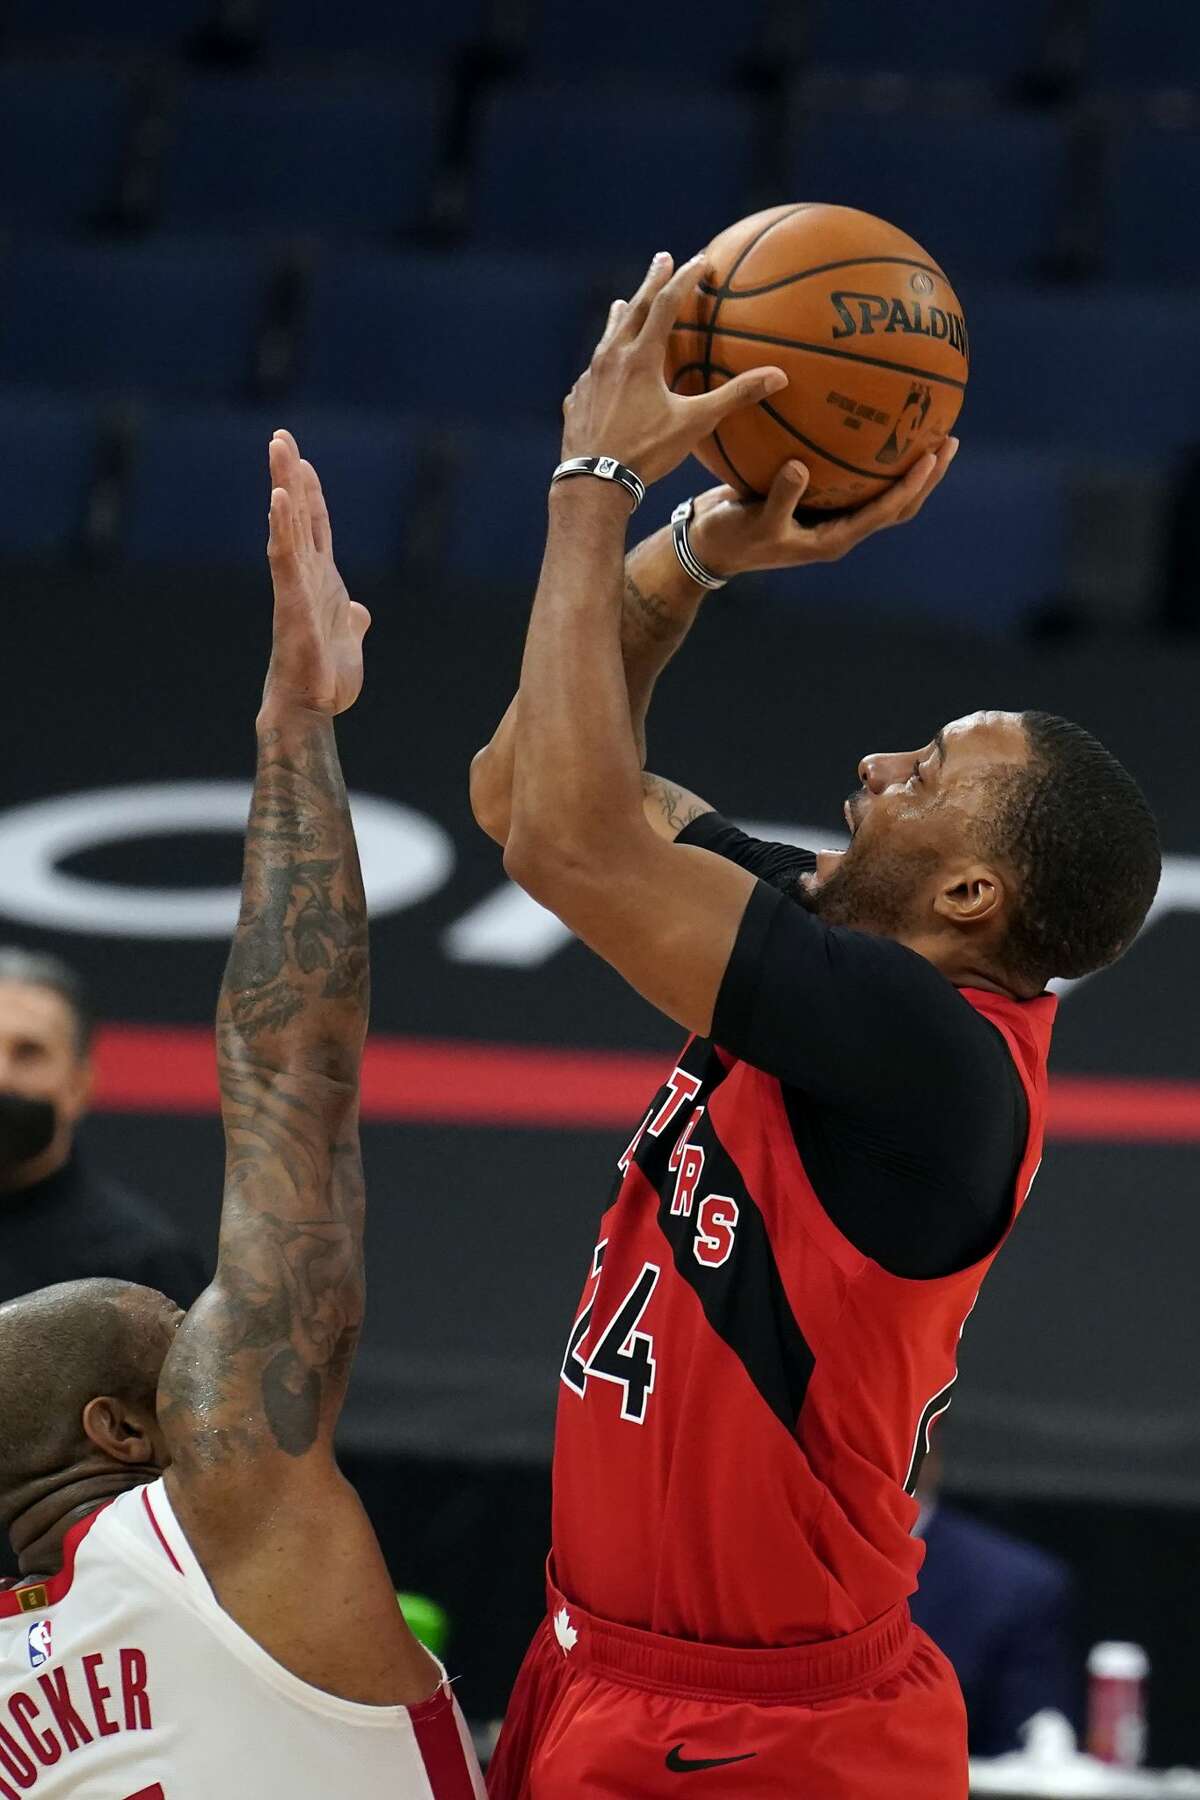 Toronto Raptors guard Norman Powell (24) shoots over Houston Rockets forward P.J. Tucker (17) during the first half of an NBA basketball game Friday, Feb. 26, 2021, in Tampa, Fla. (AP Photo/Chris O'Meara)